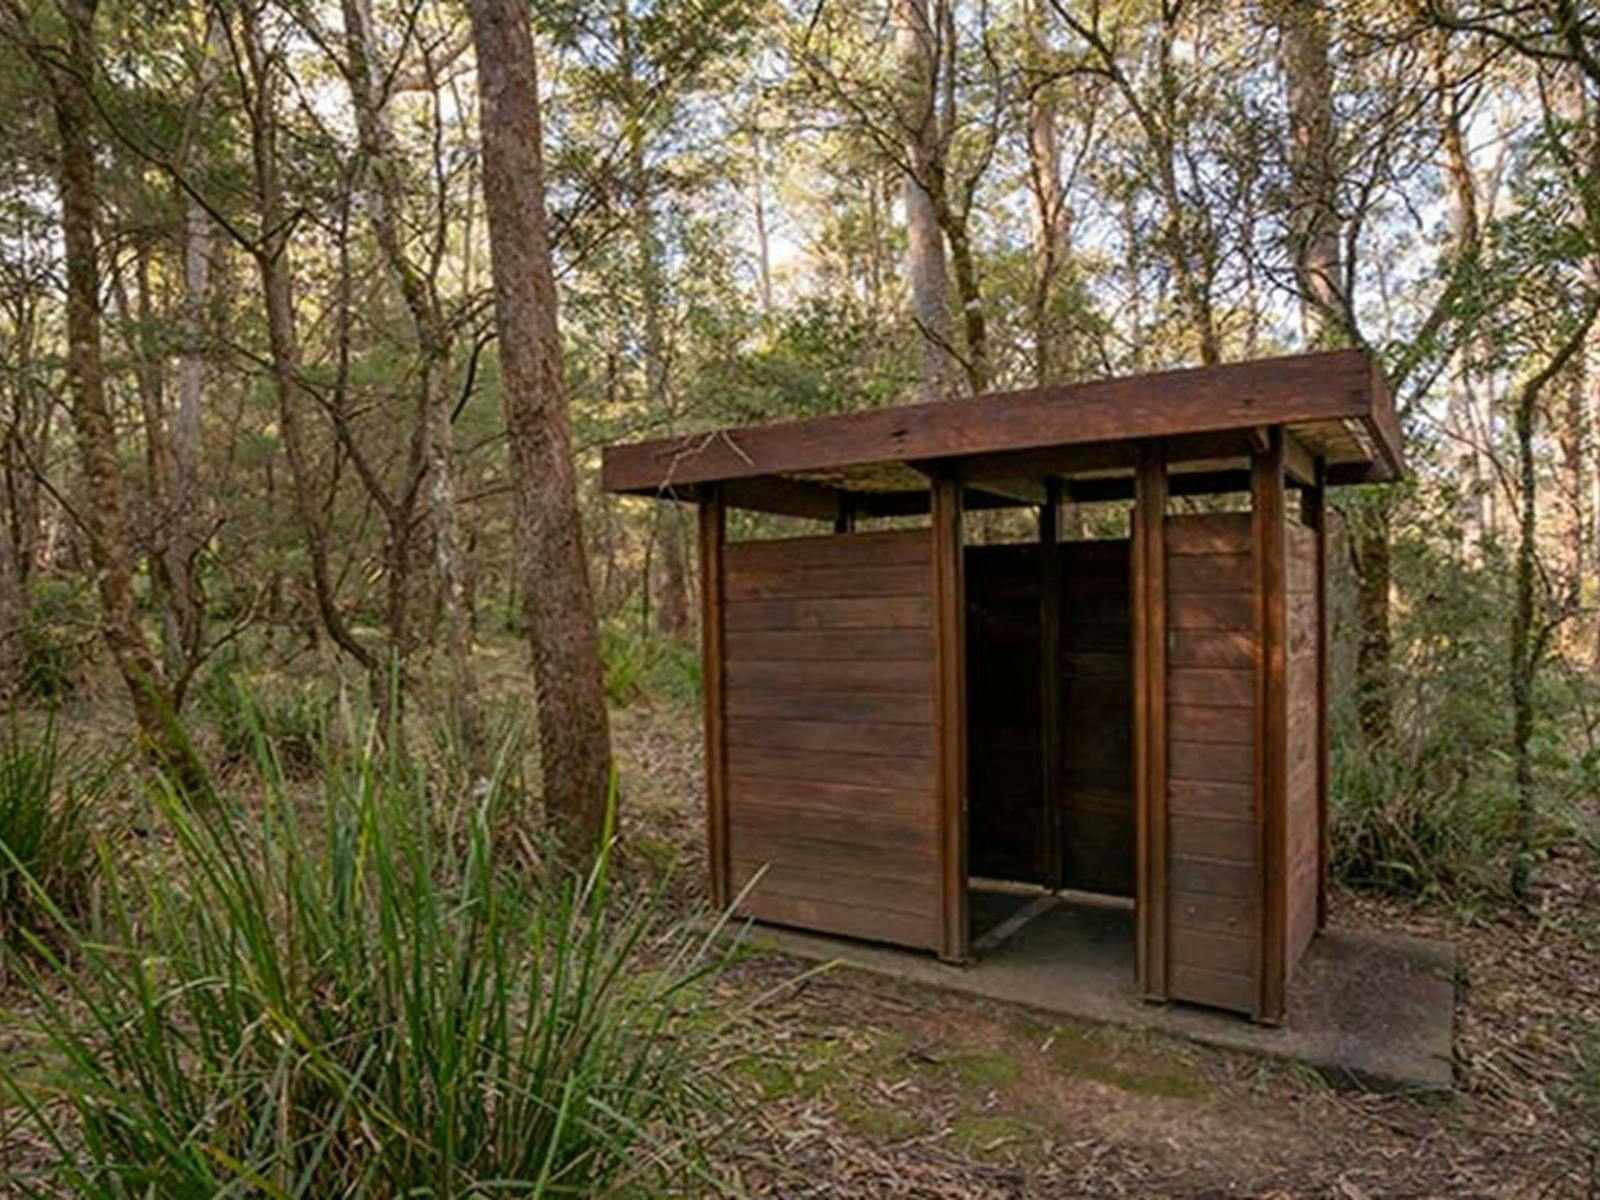 Exterior of toilet block at Thungutti campground. Photo: John Spencer/OEH